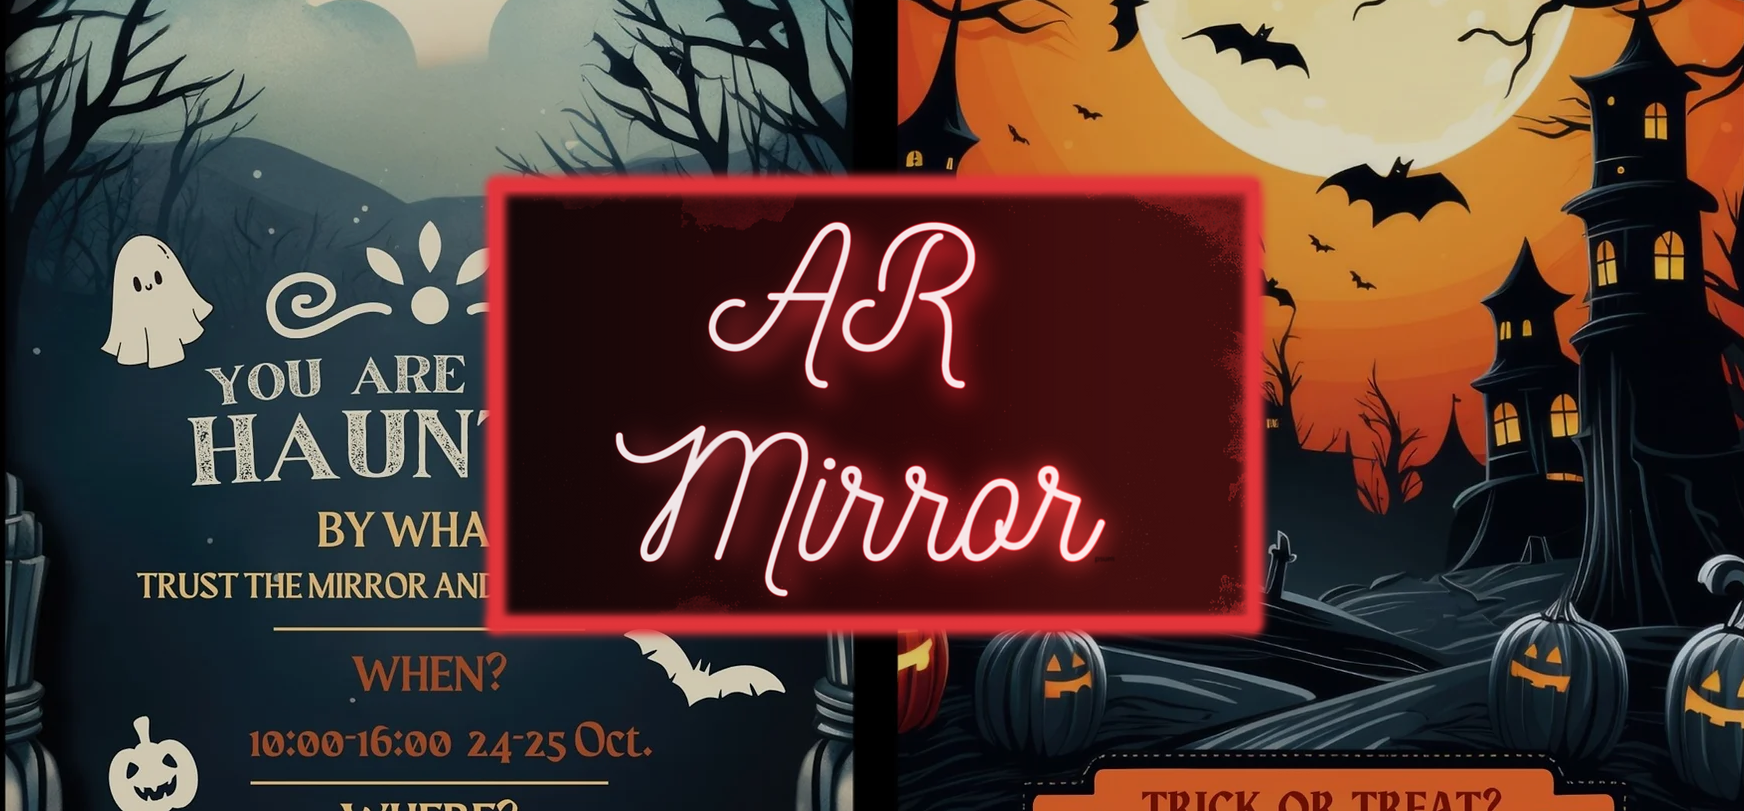 Thumbnail for the project AR Mirror